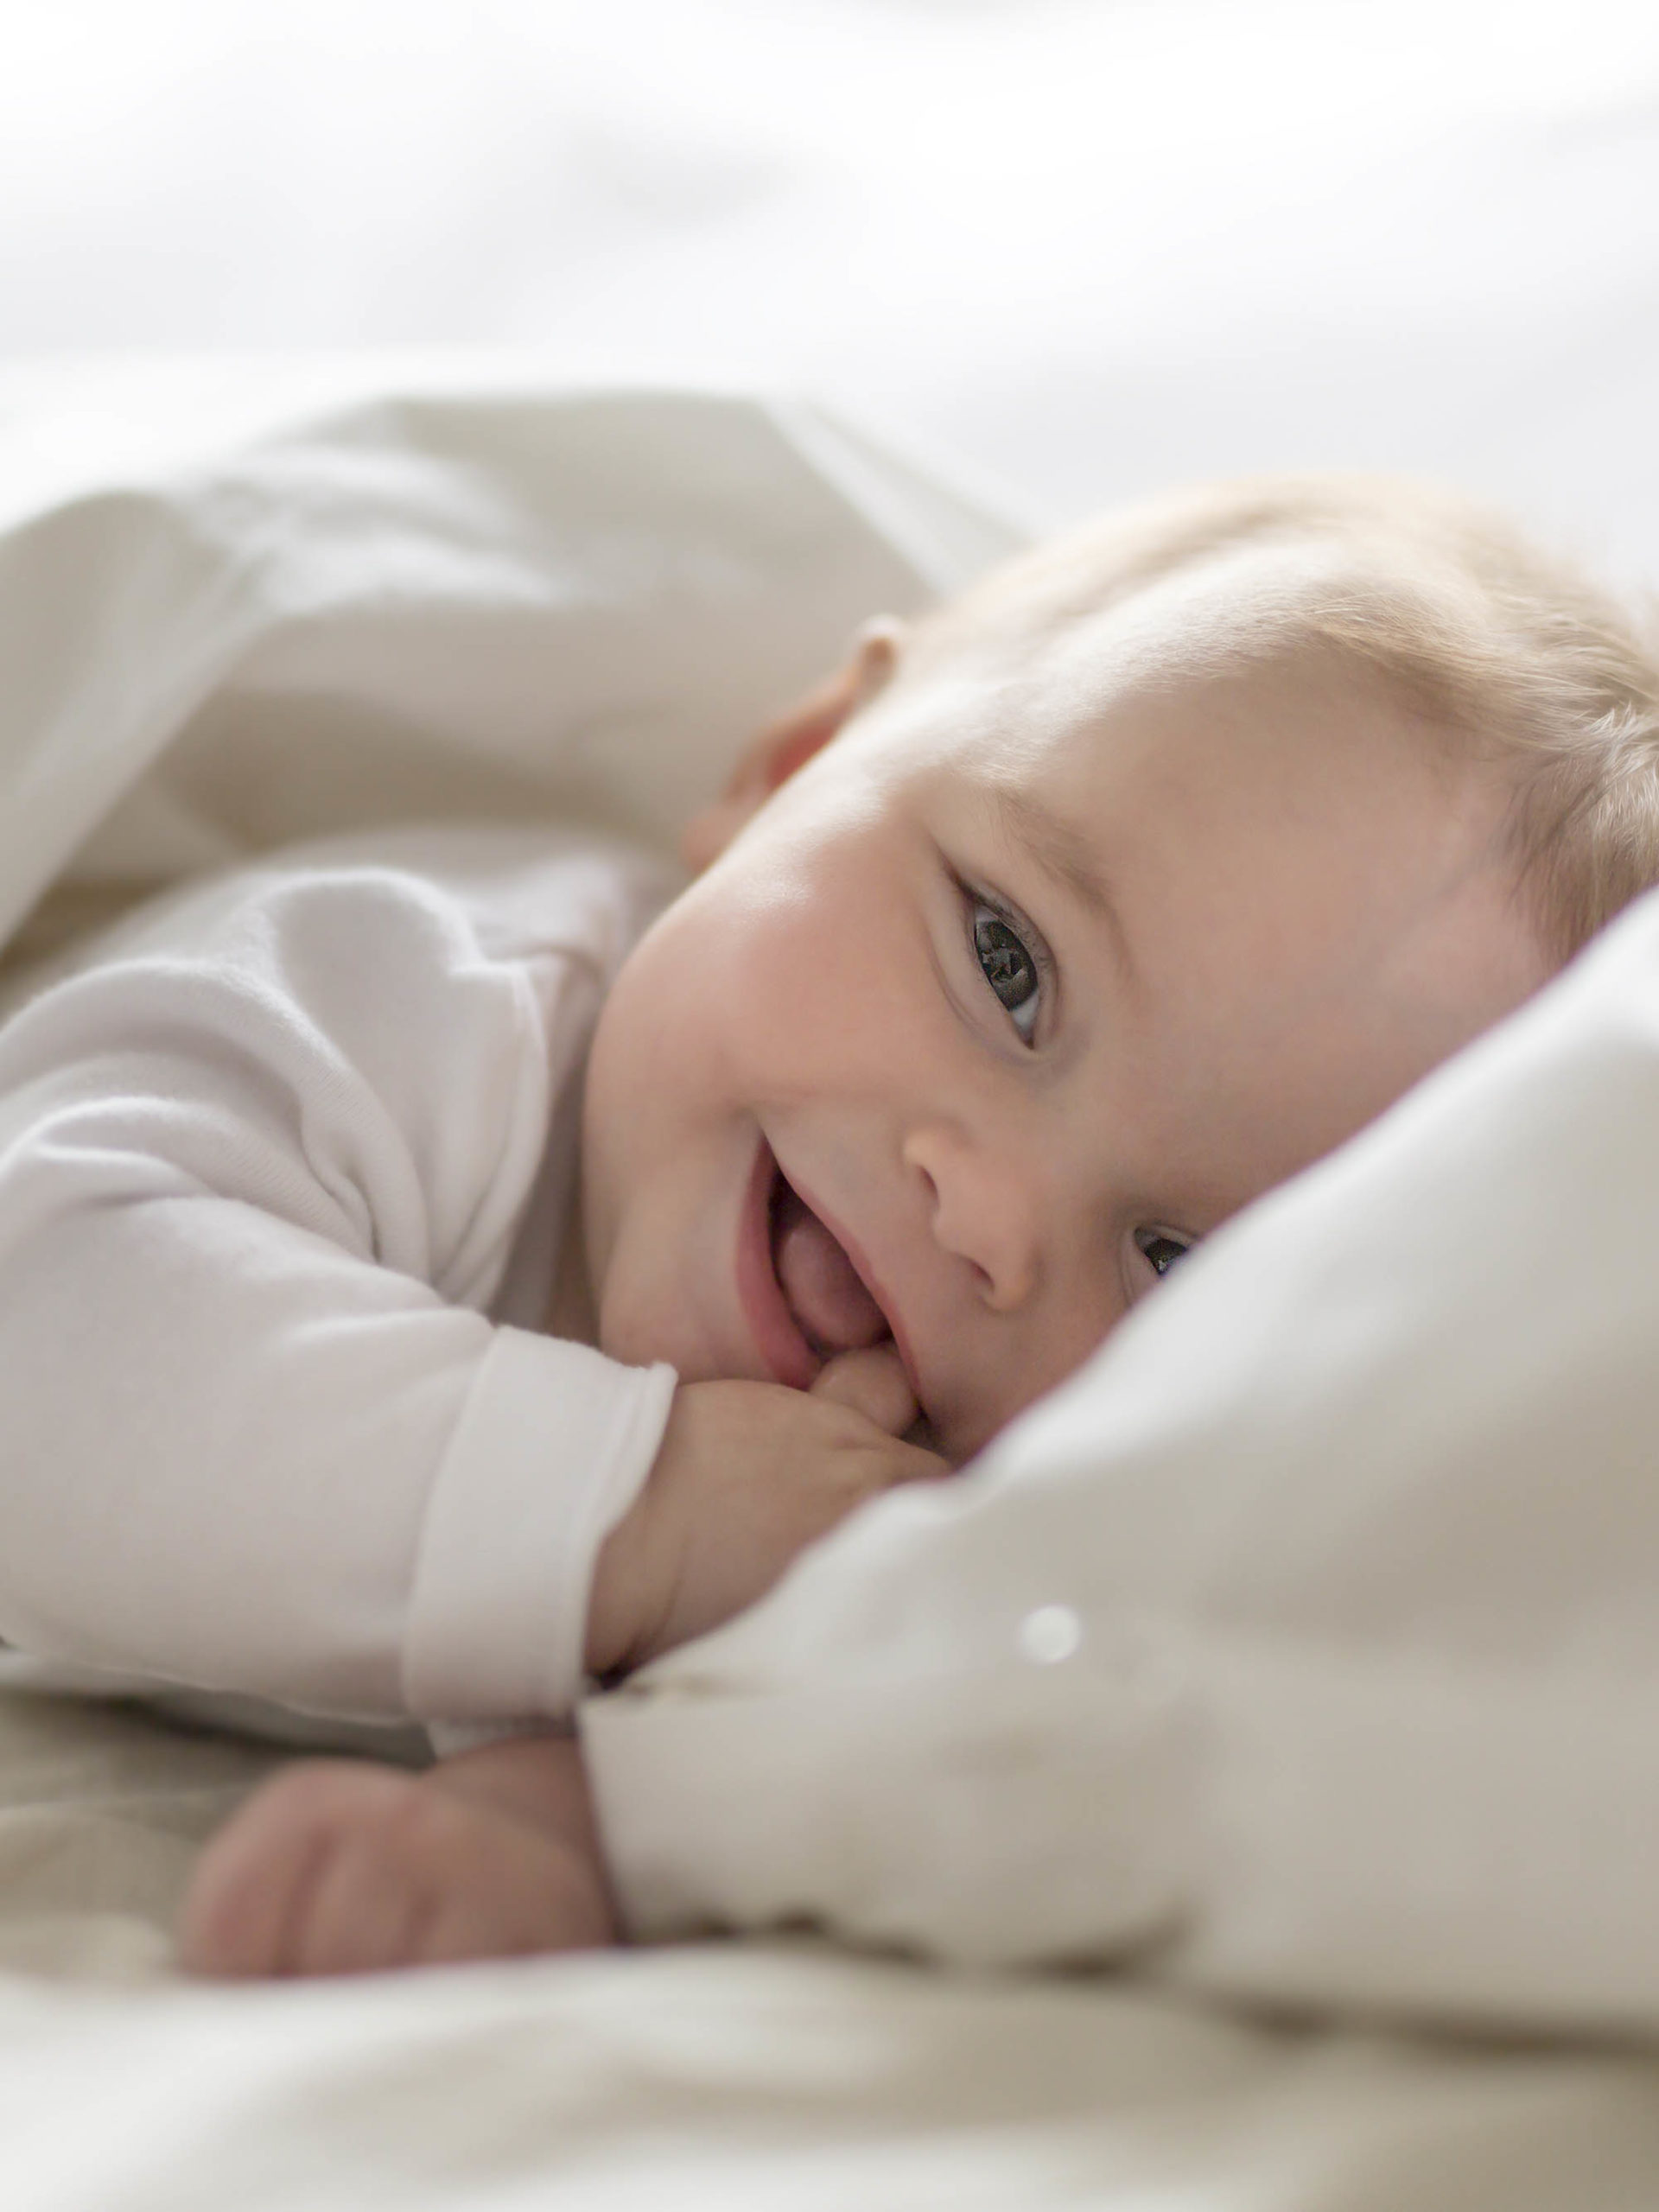 smiling baby girl nestled in bed after waking up from nap